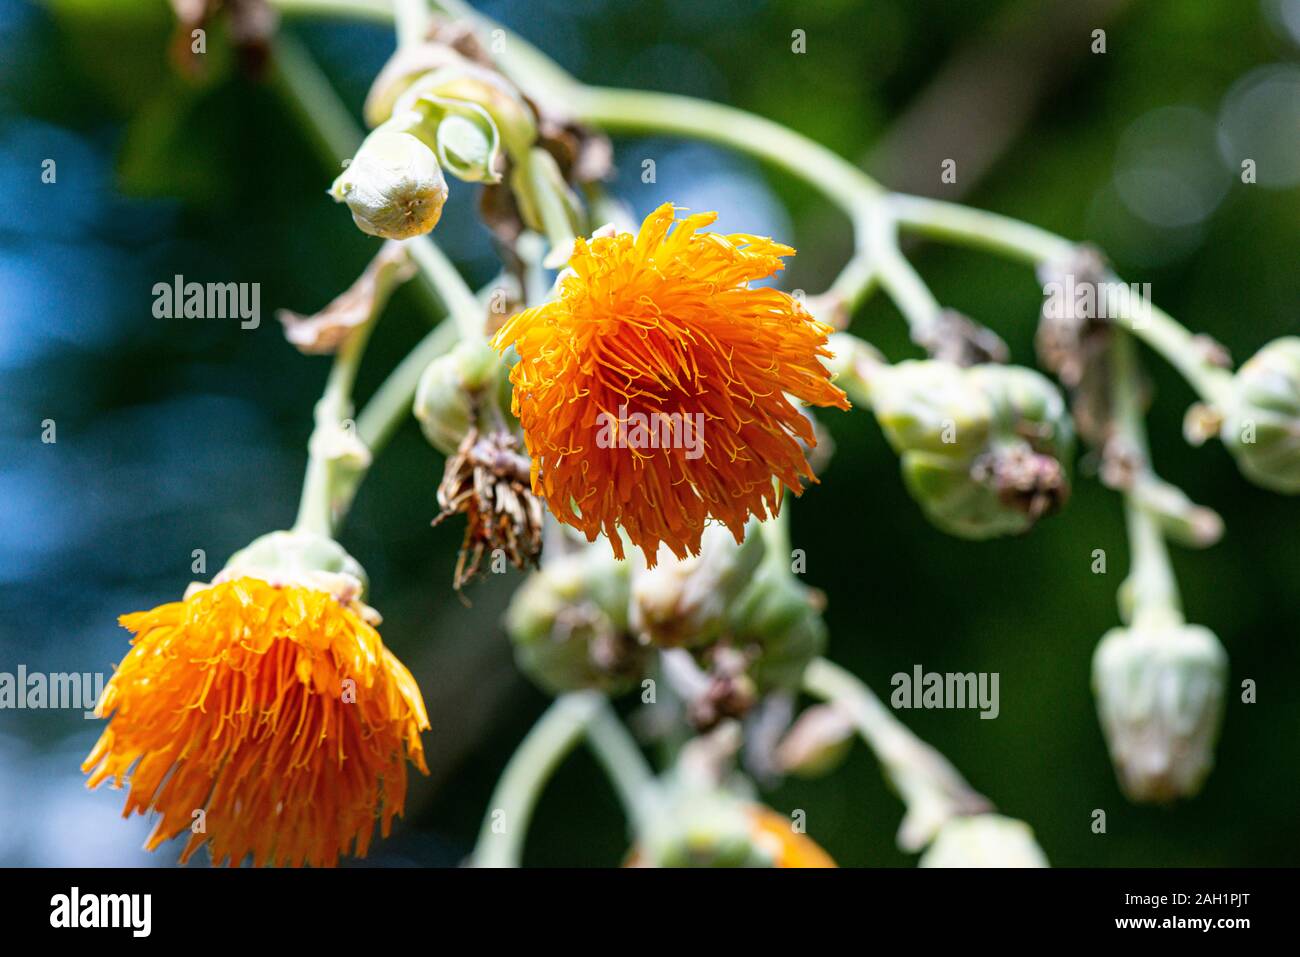 The flowers of a cabbage tree (Dendroseris litoralis) Stock Photo